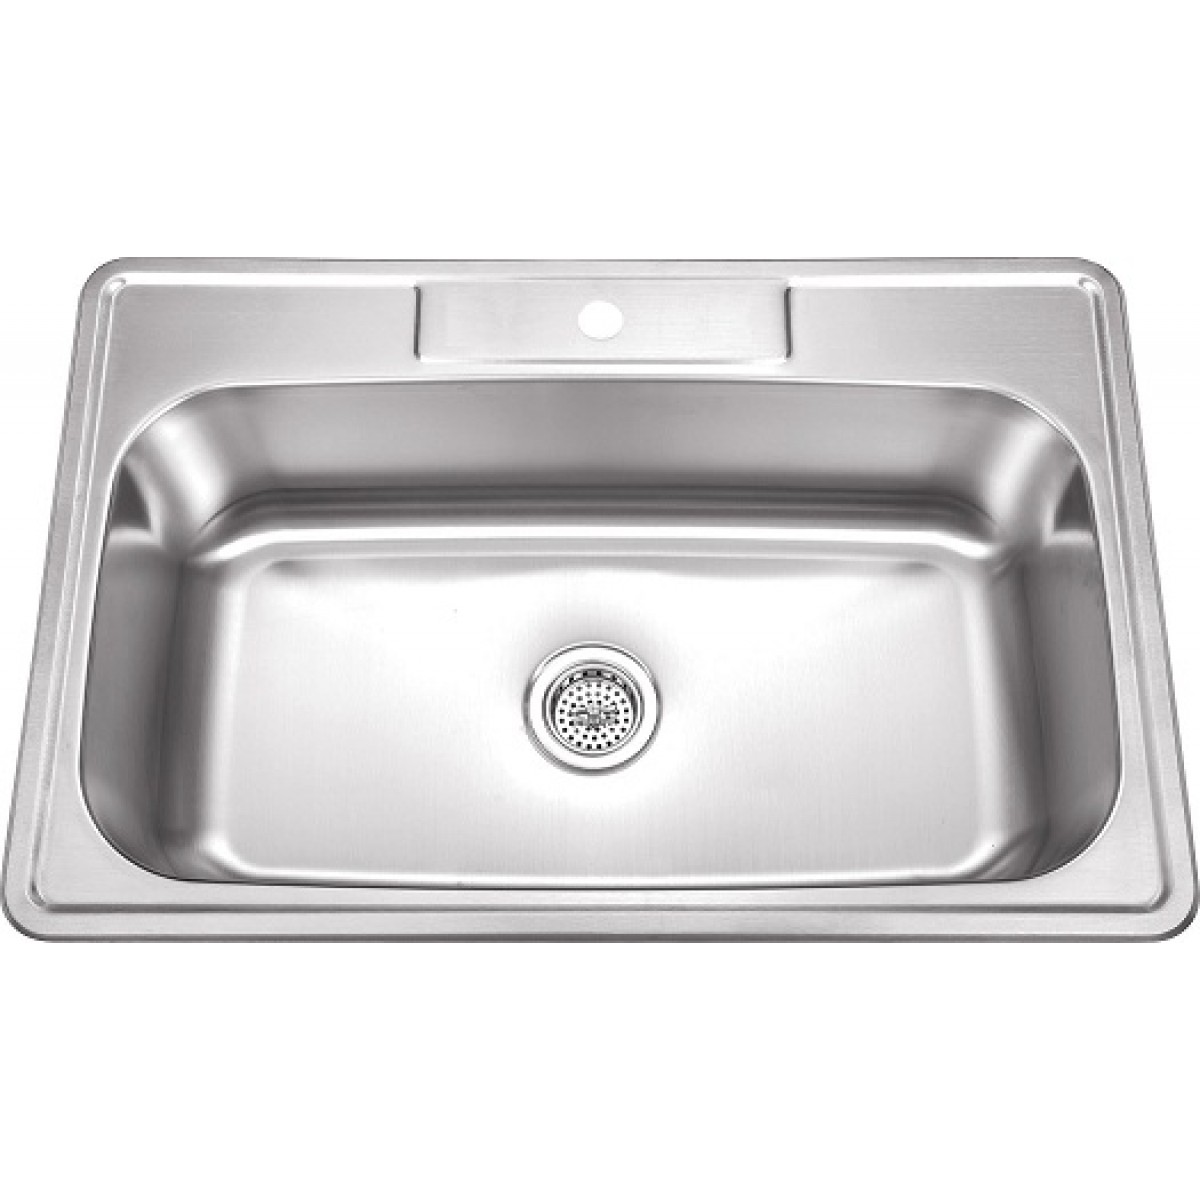 33 Inch Stainless Steel Top Mount Drop In Single Bowl Kitchen Sink W One Faucet Hole